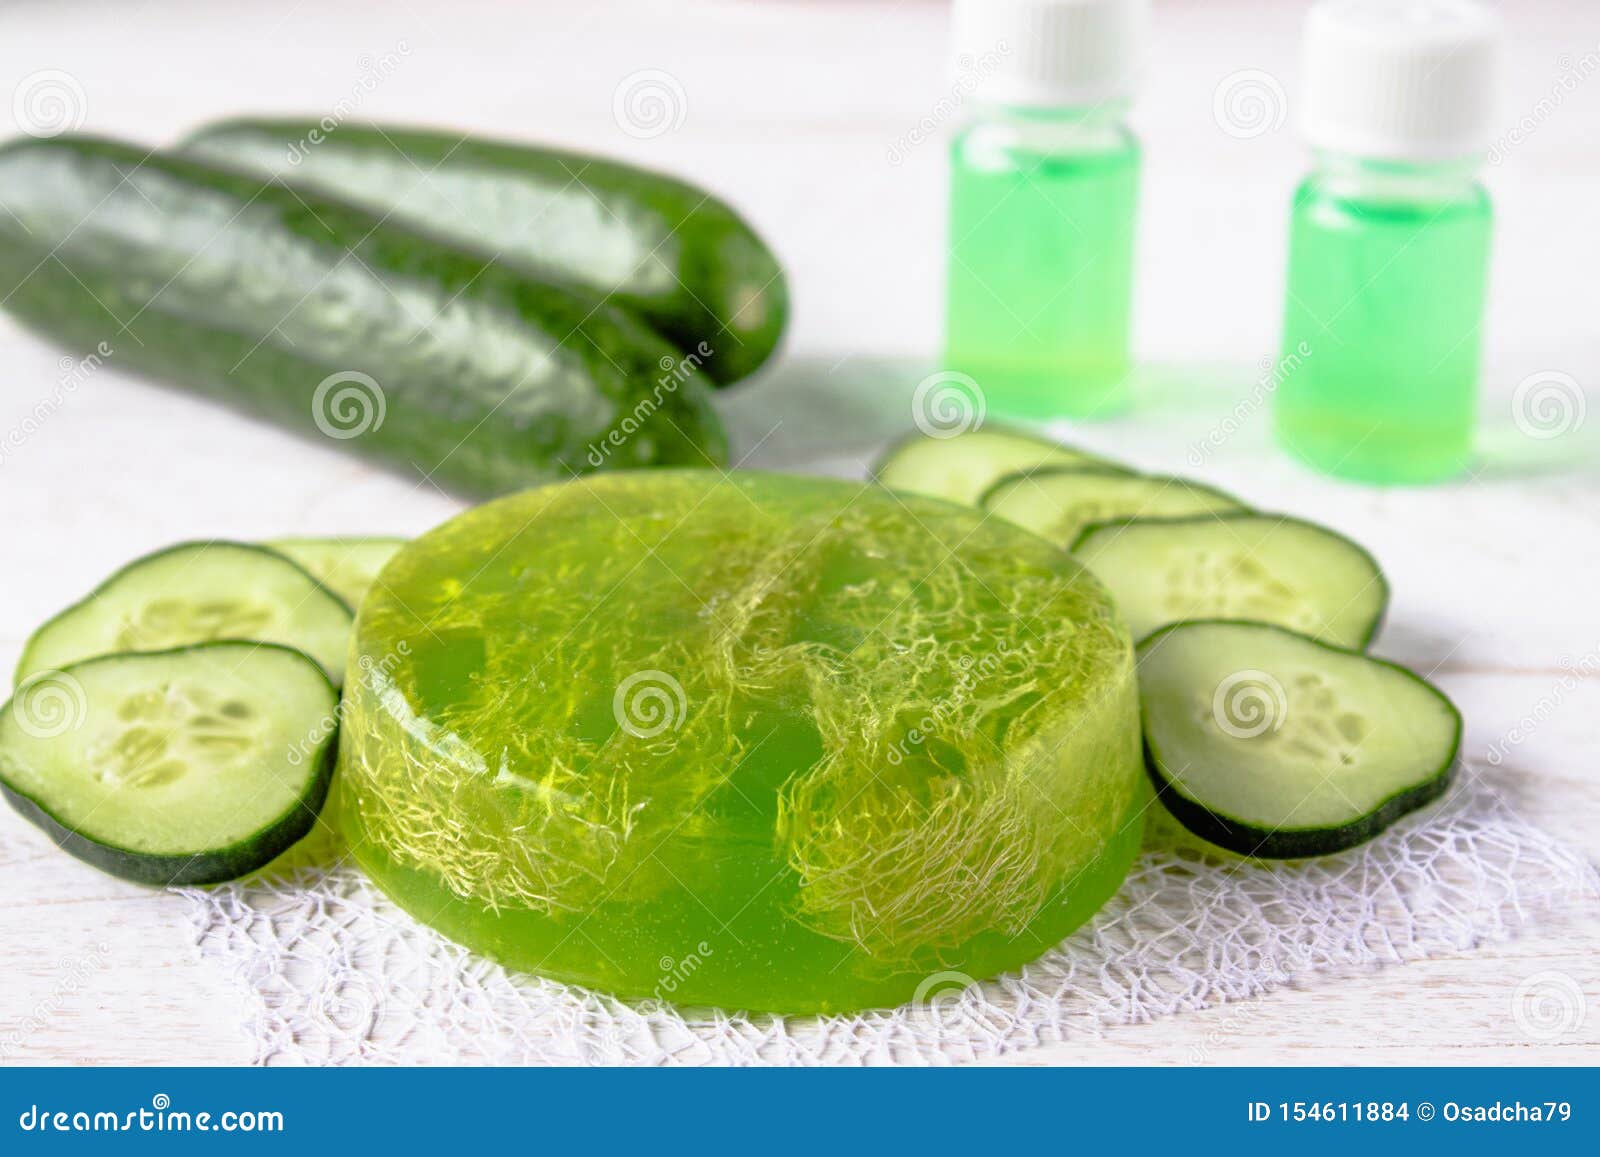 Green Cucumber Soap on a White Background with Cucumber Slices and